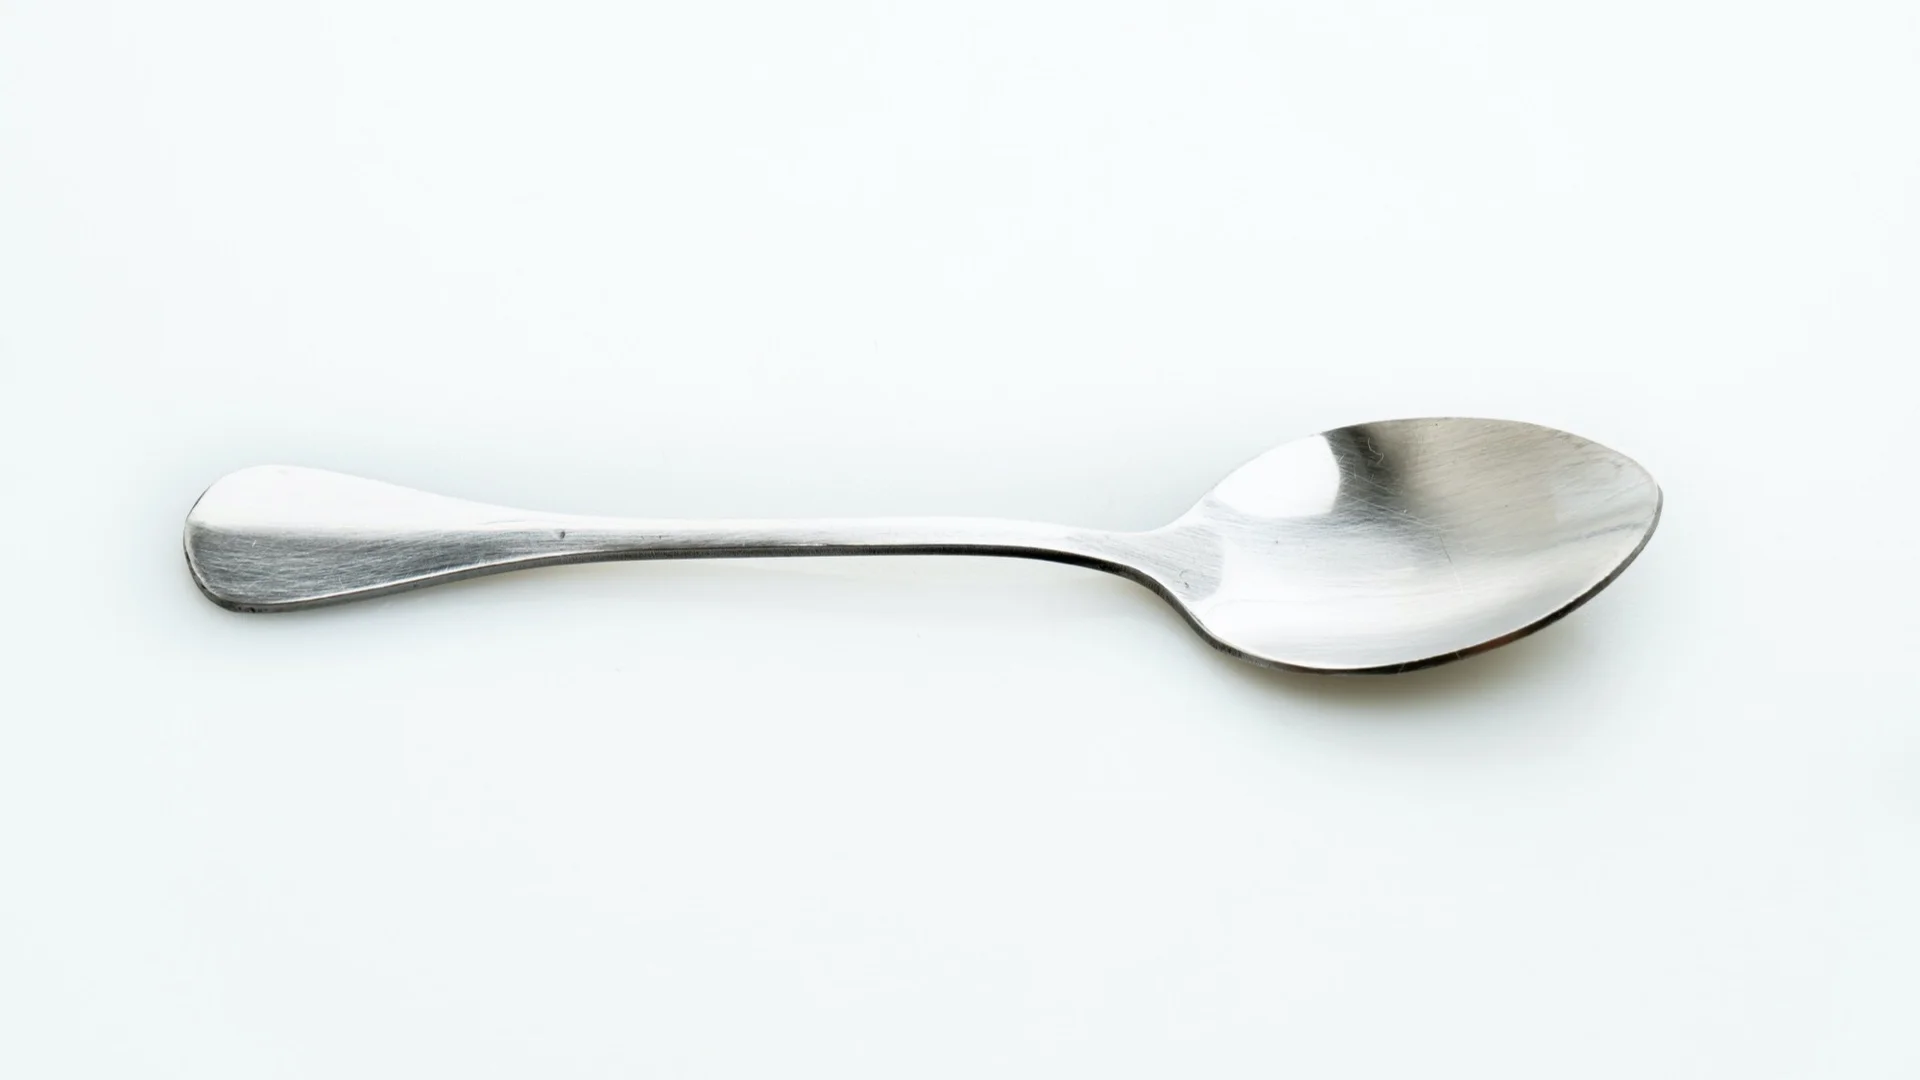 The Concept of Teaspoons